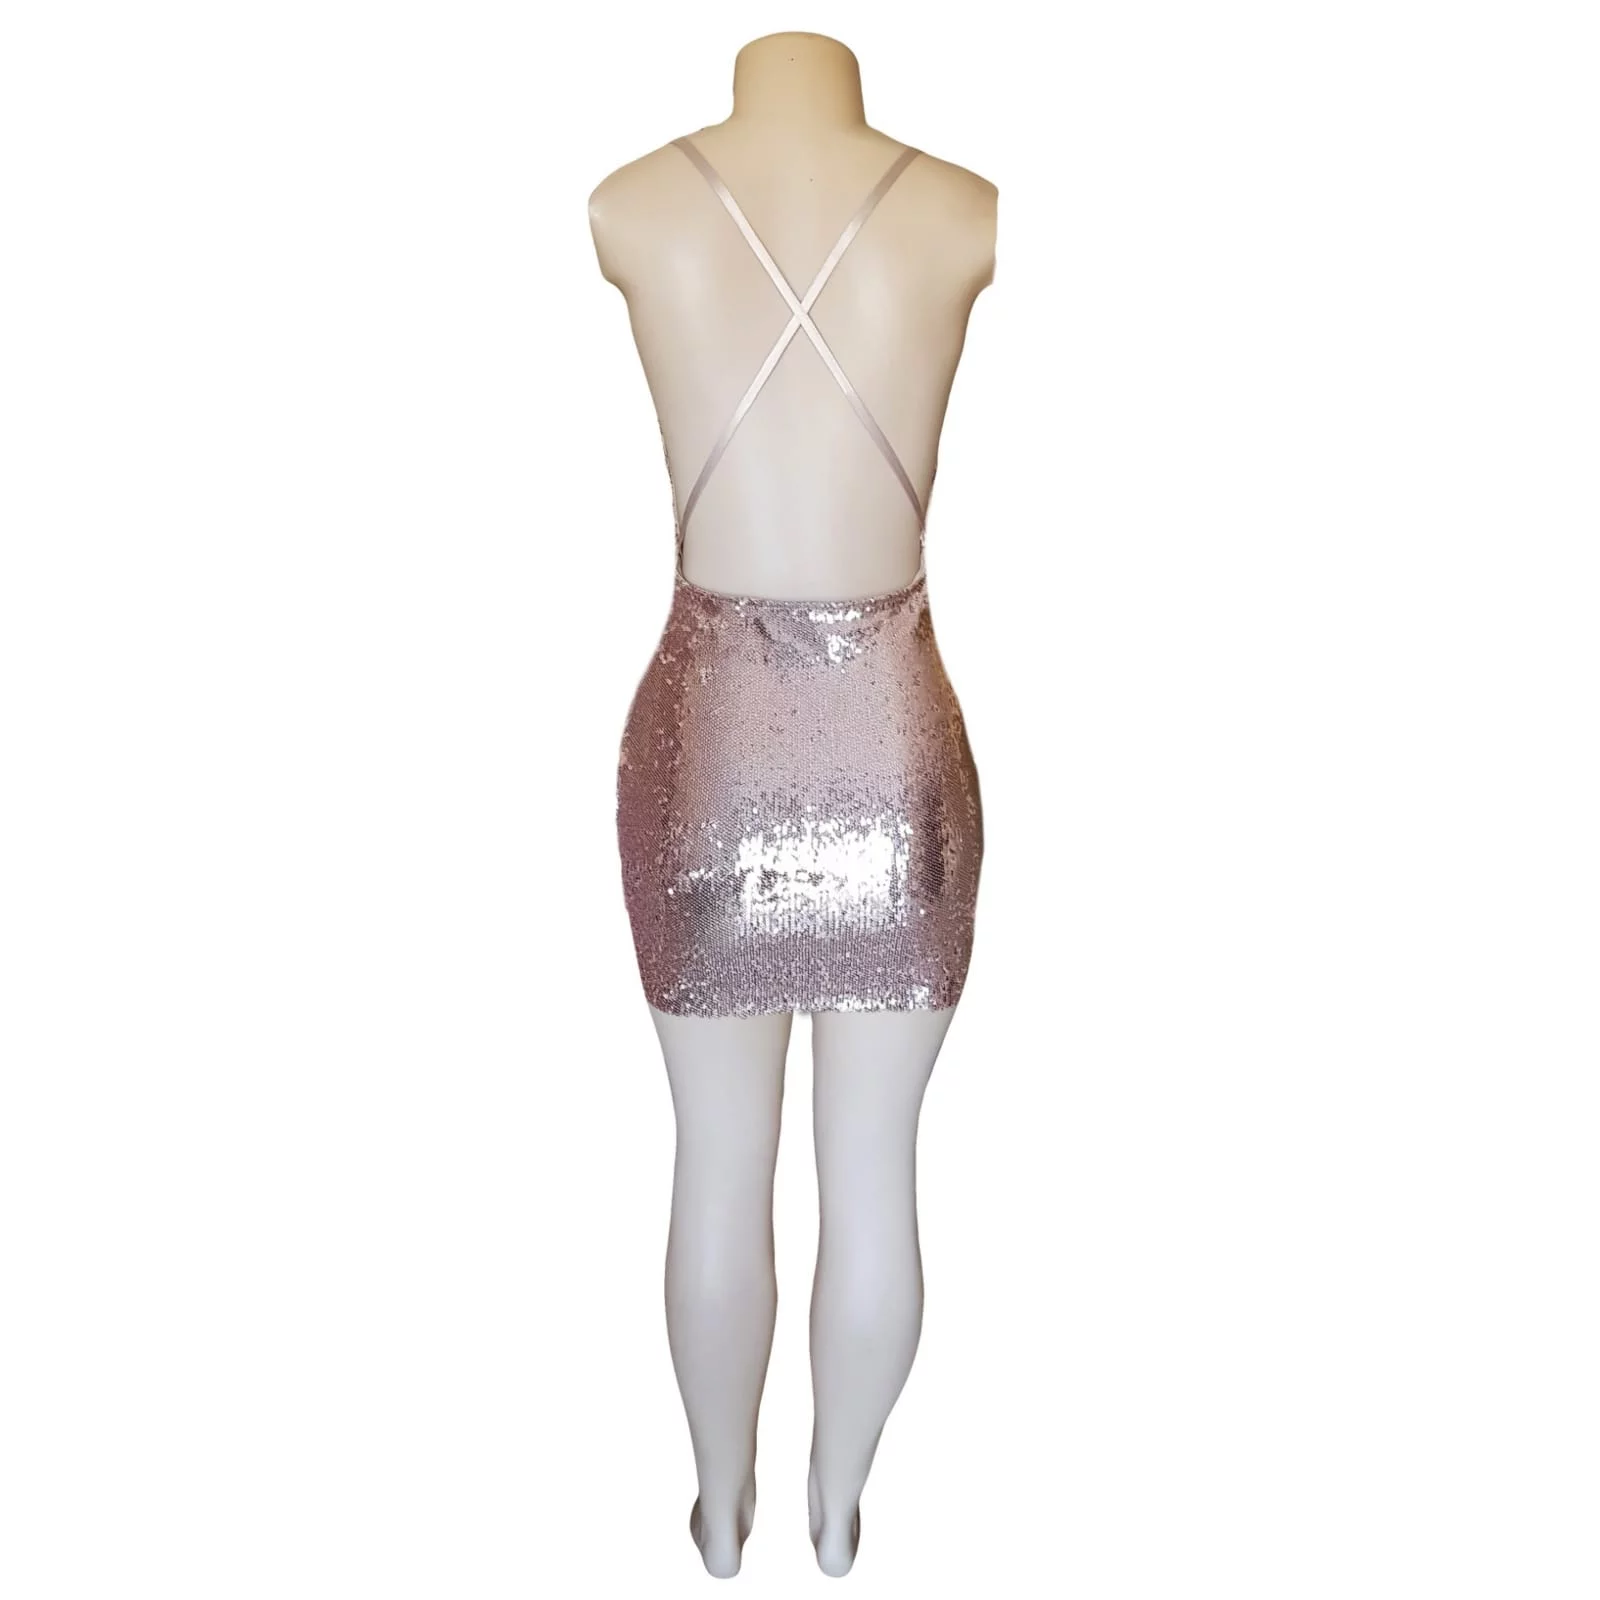 Short mini rose gold fully sequins smart casual dress 5 short mini rose gold fully sequins smart casual dress with a low open back and thin crossed spaghetti straps.